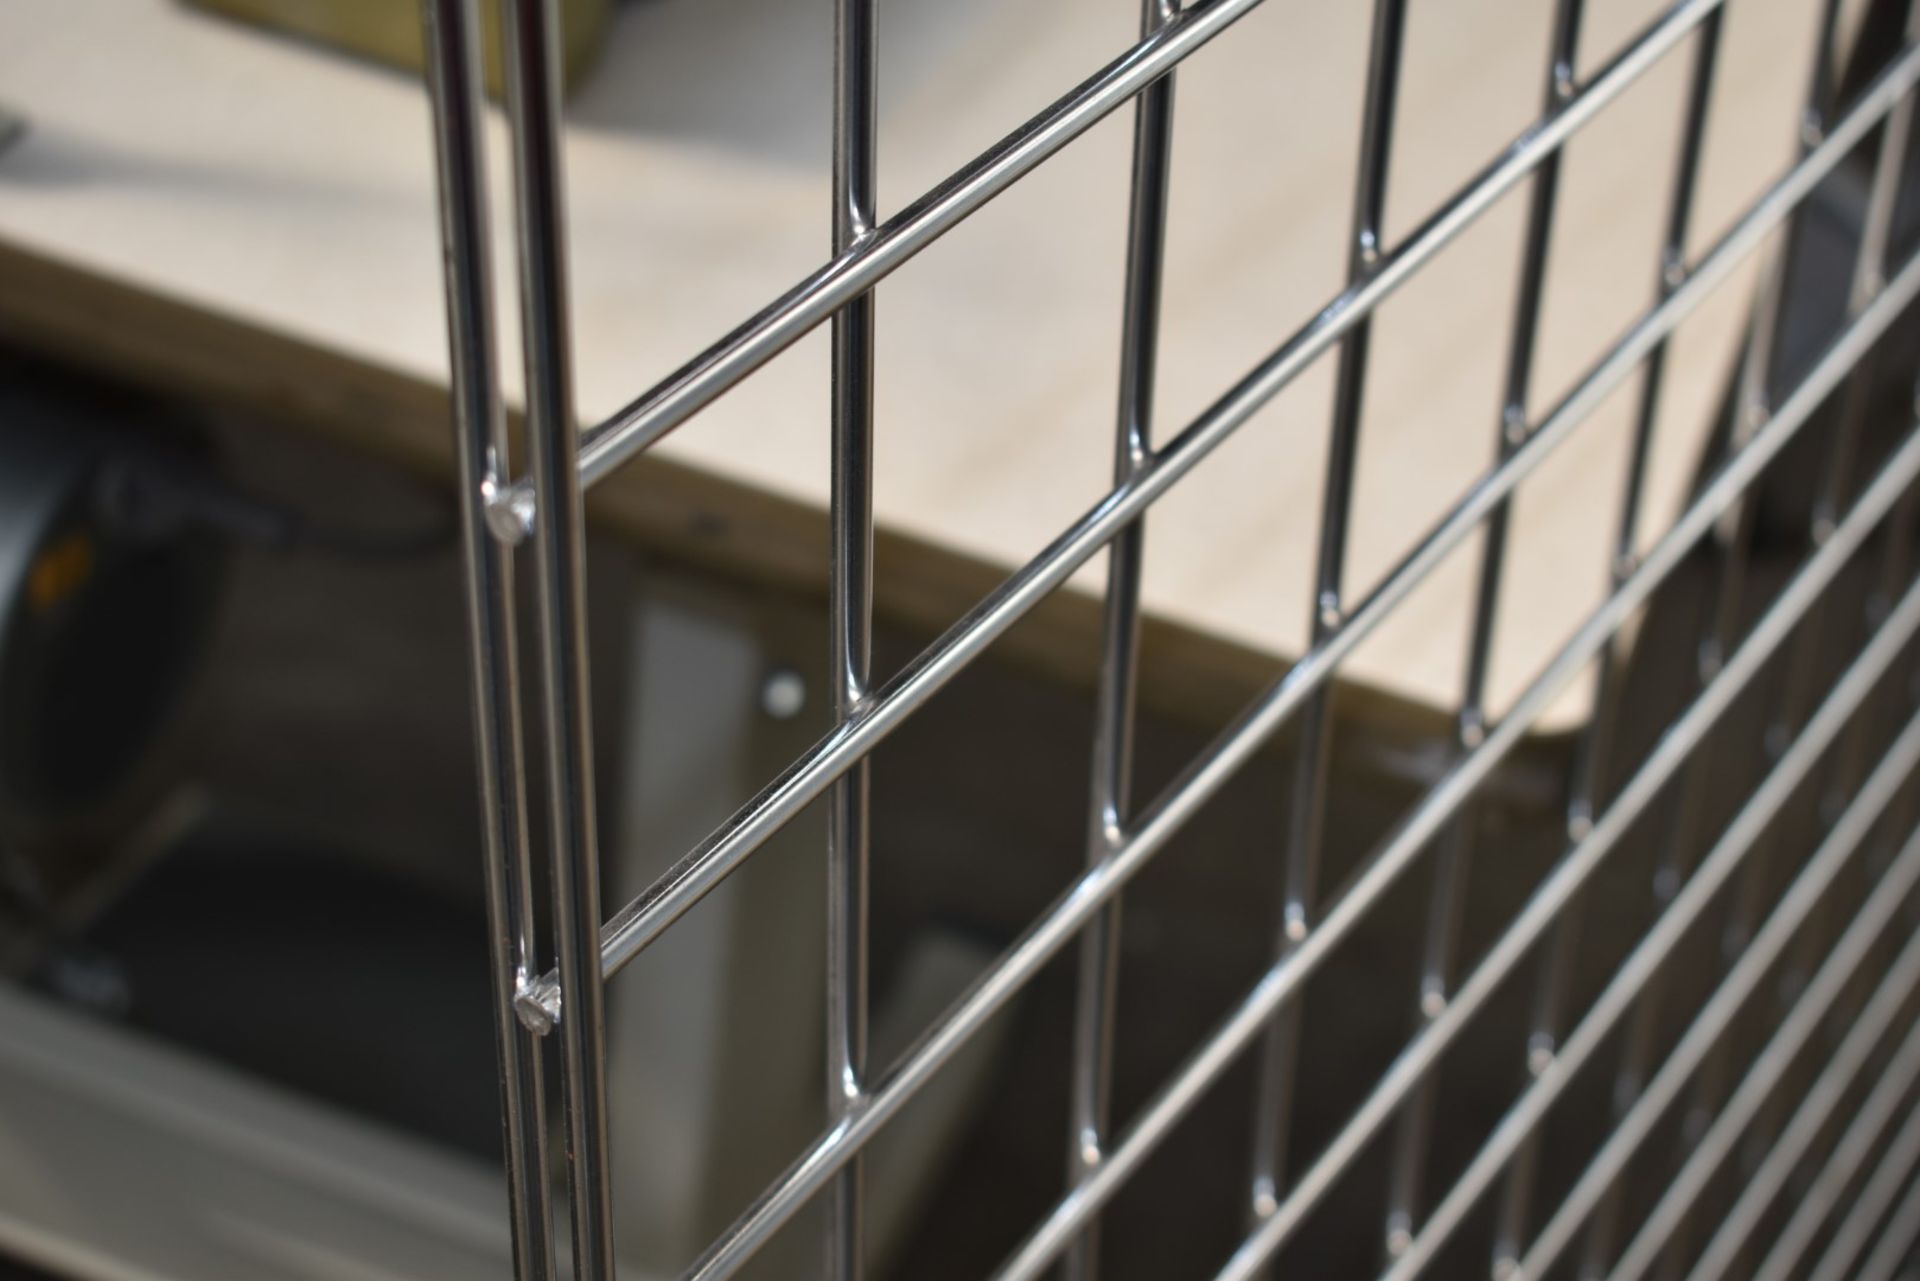 6 x Gridwall Mesh Wall Panels - Heavy Metal Construction in Chrome - Ideal For Making Security Cages - Image 5 of 8